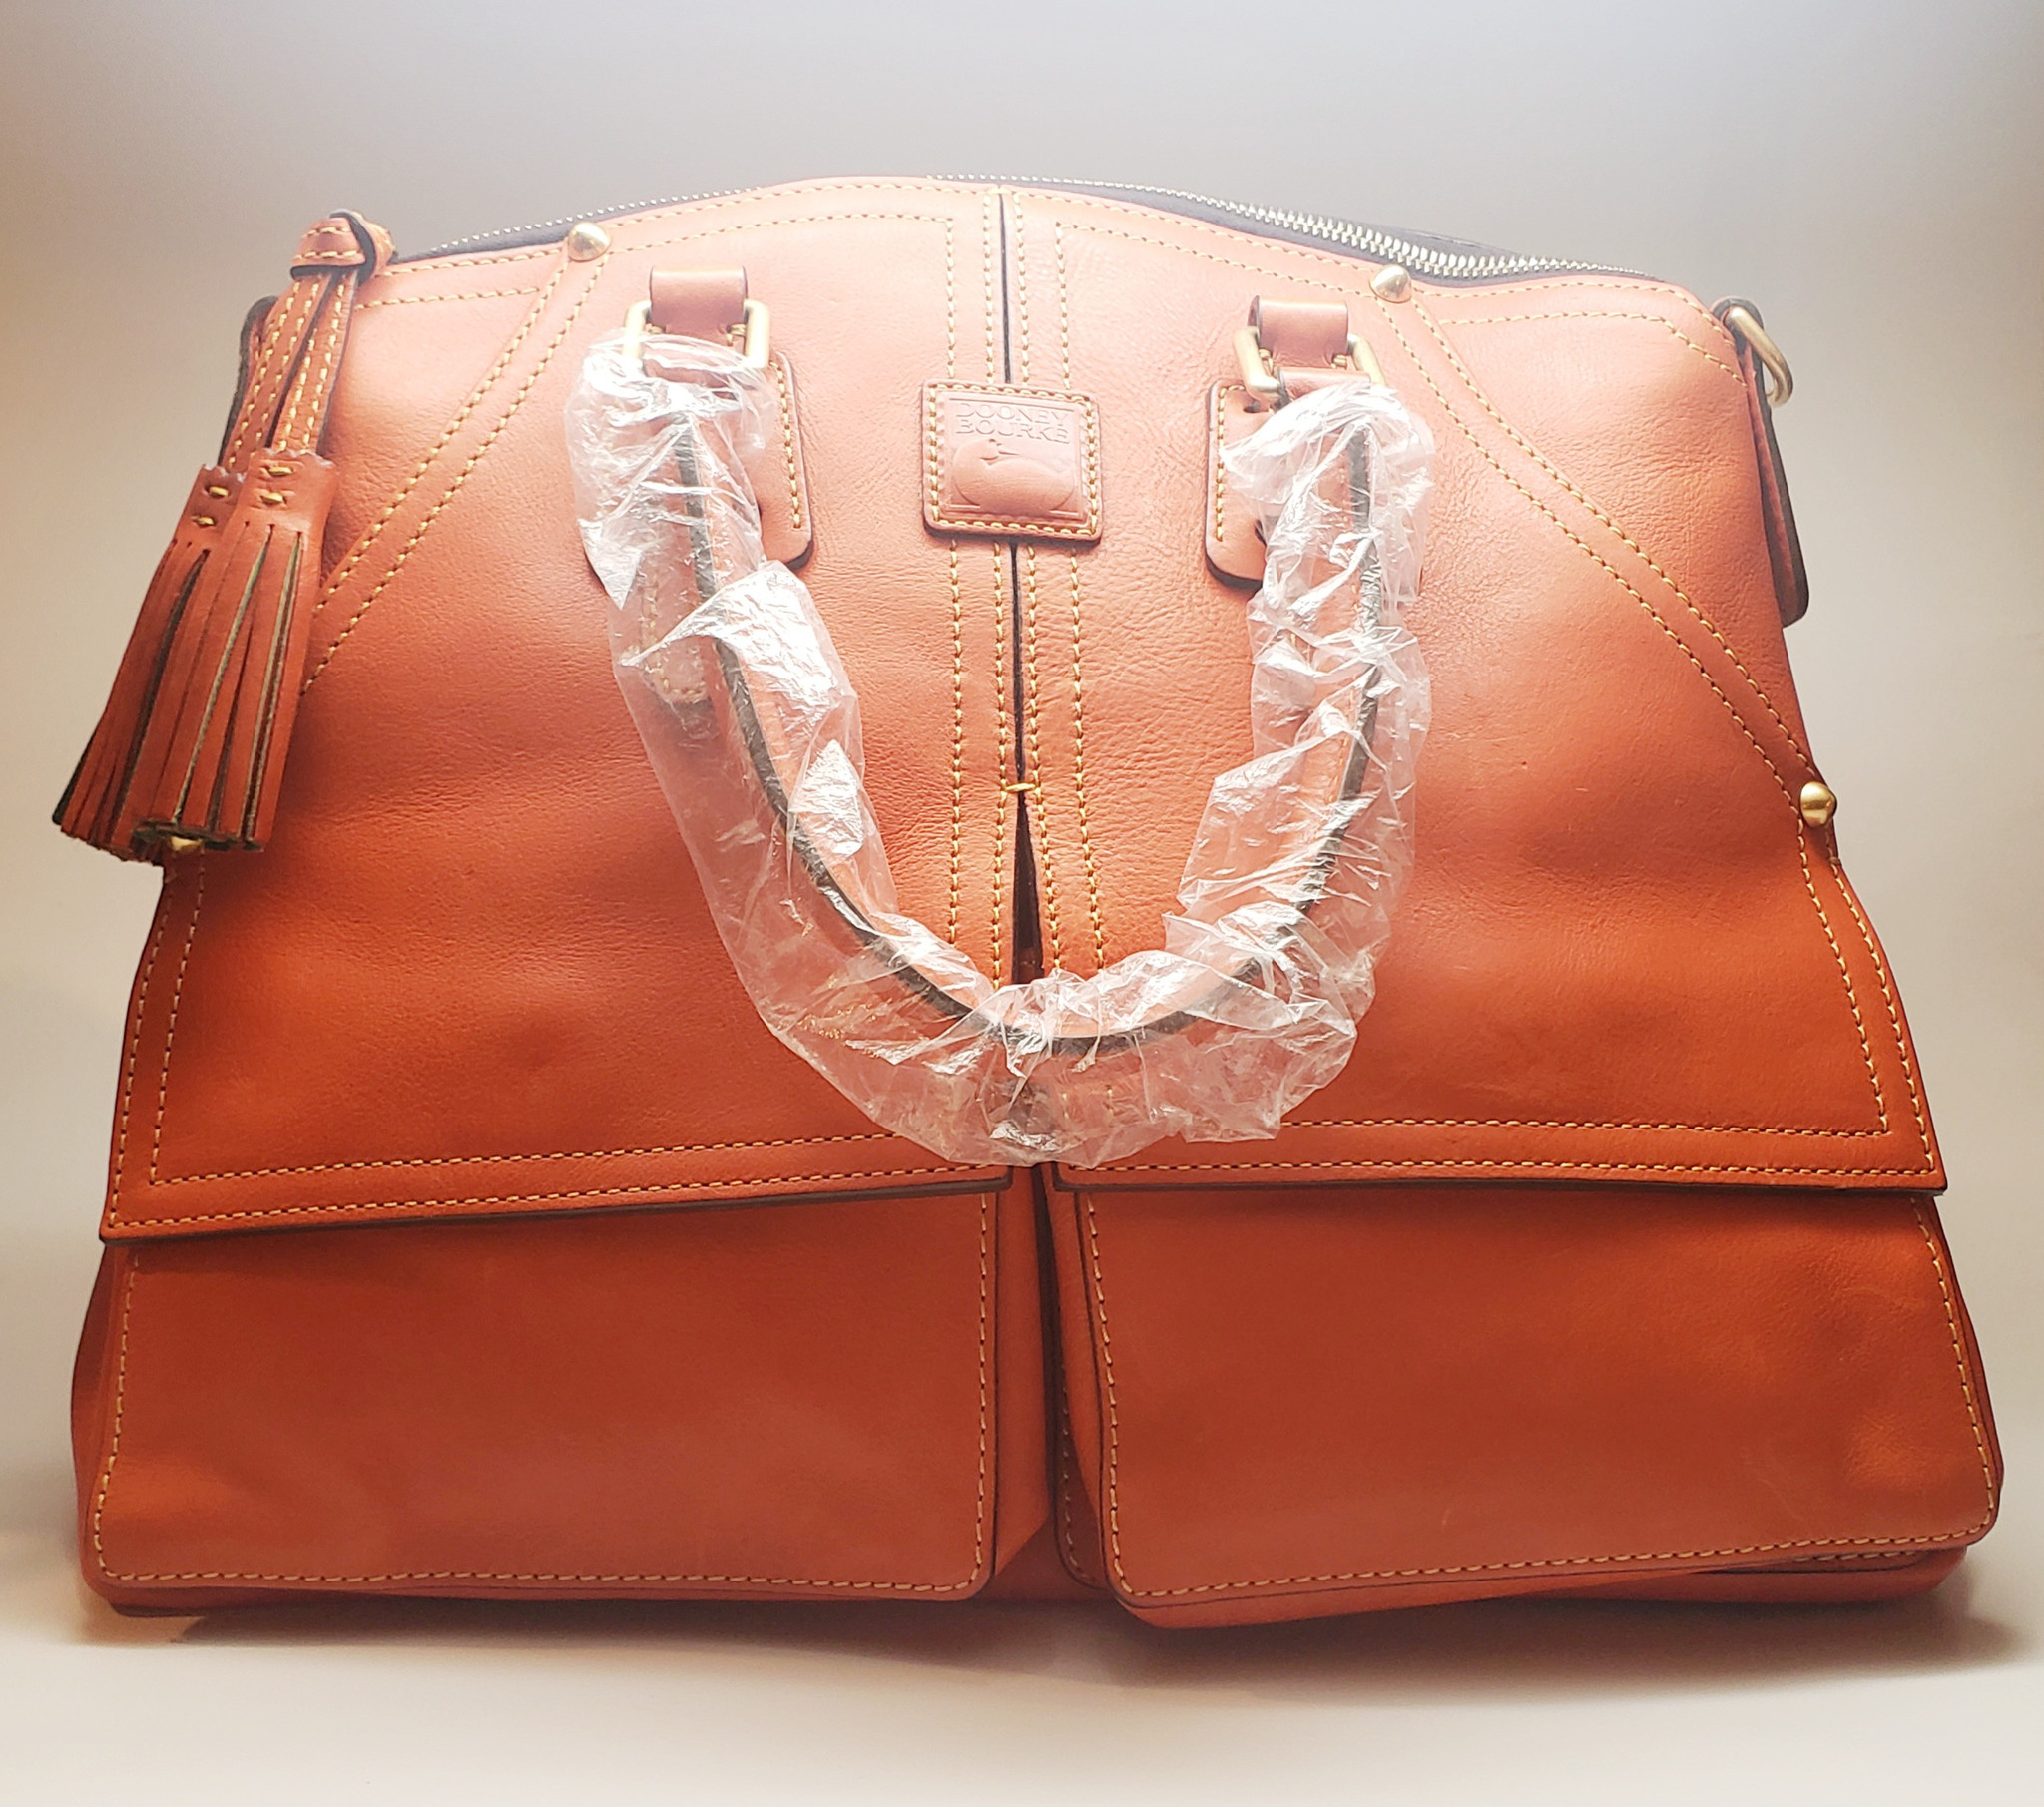 Soft Leather Bag With Multiple Compartments For Women 